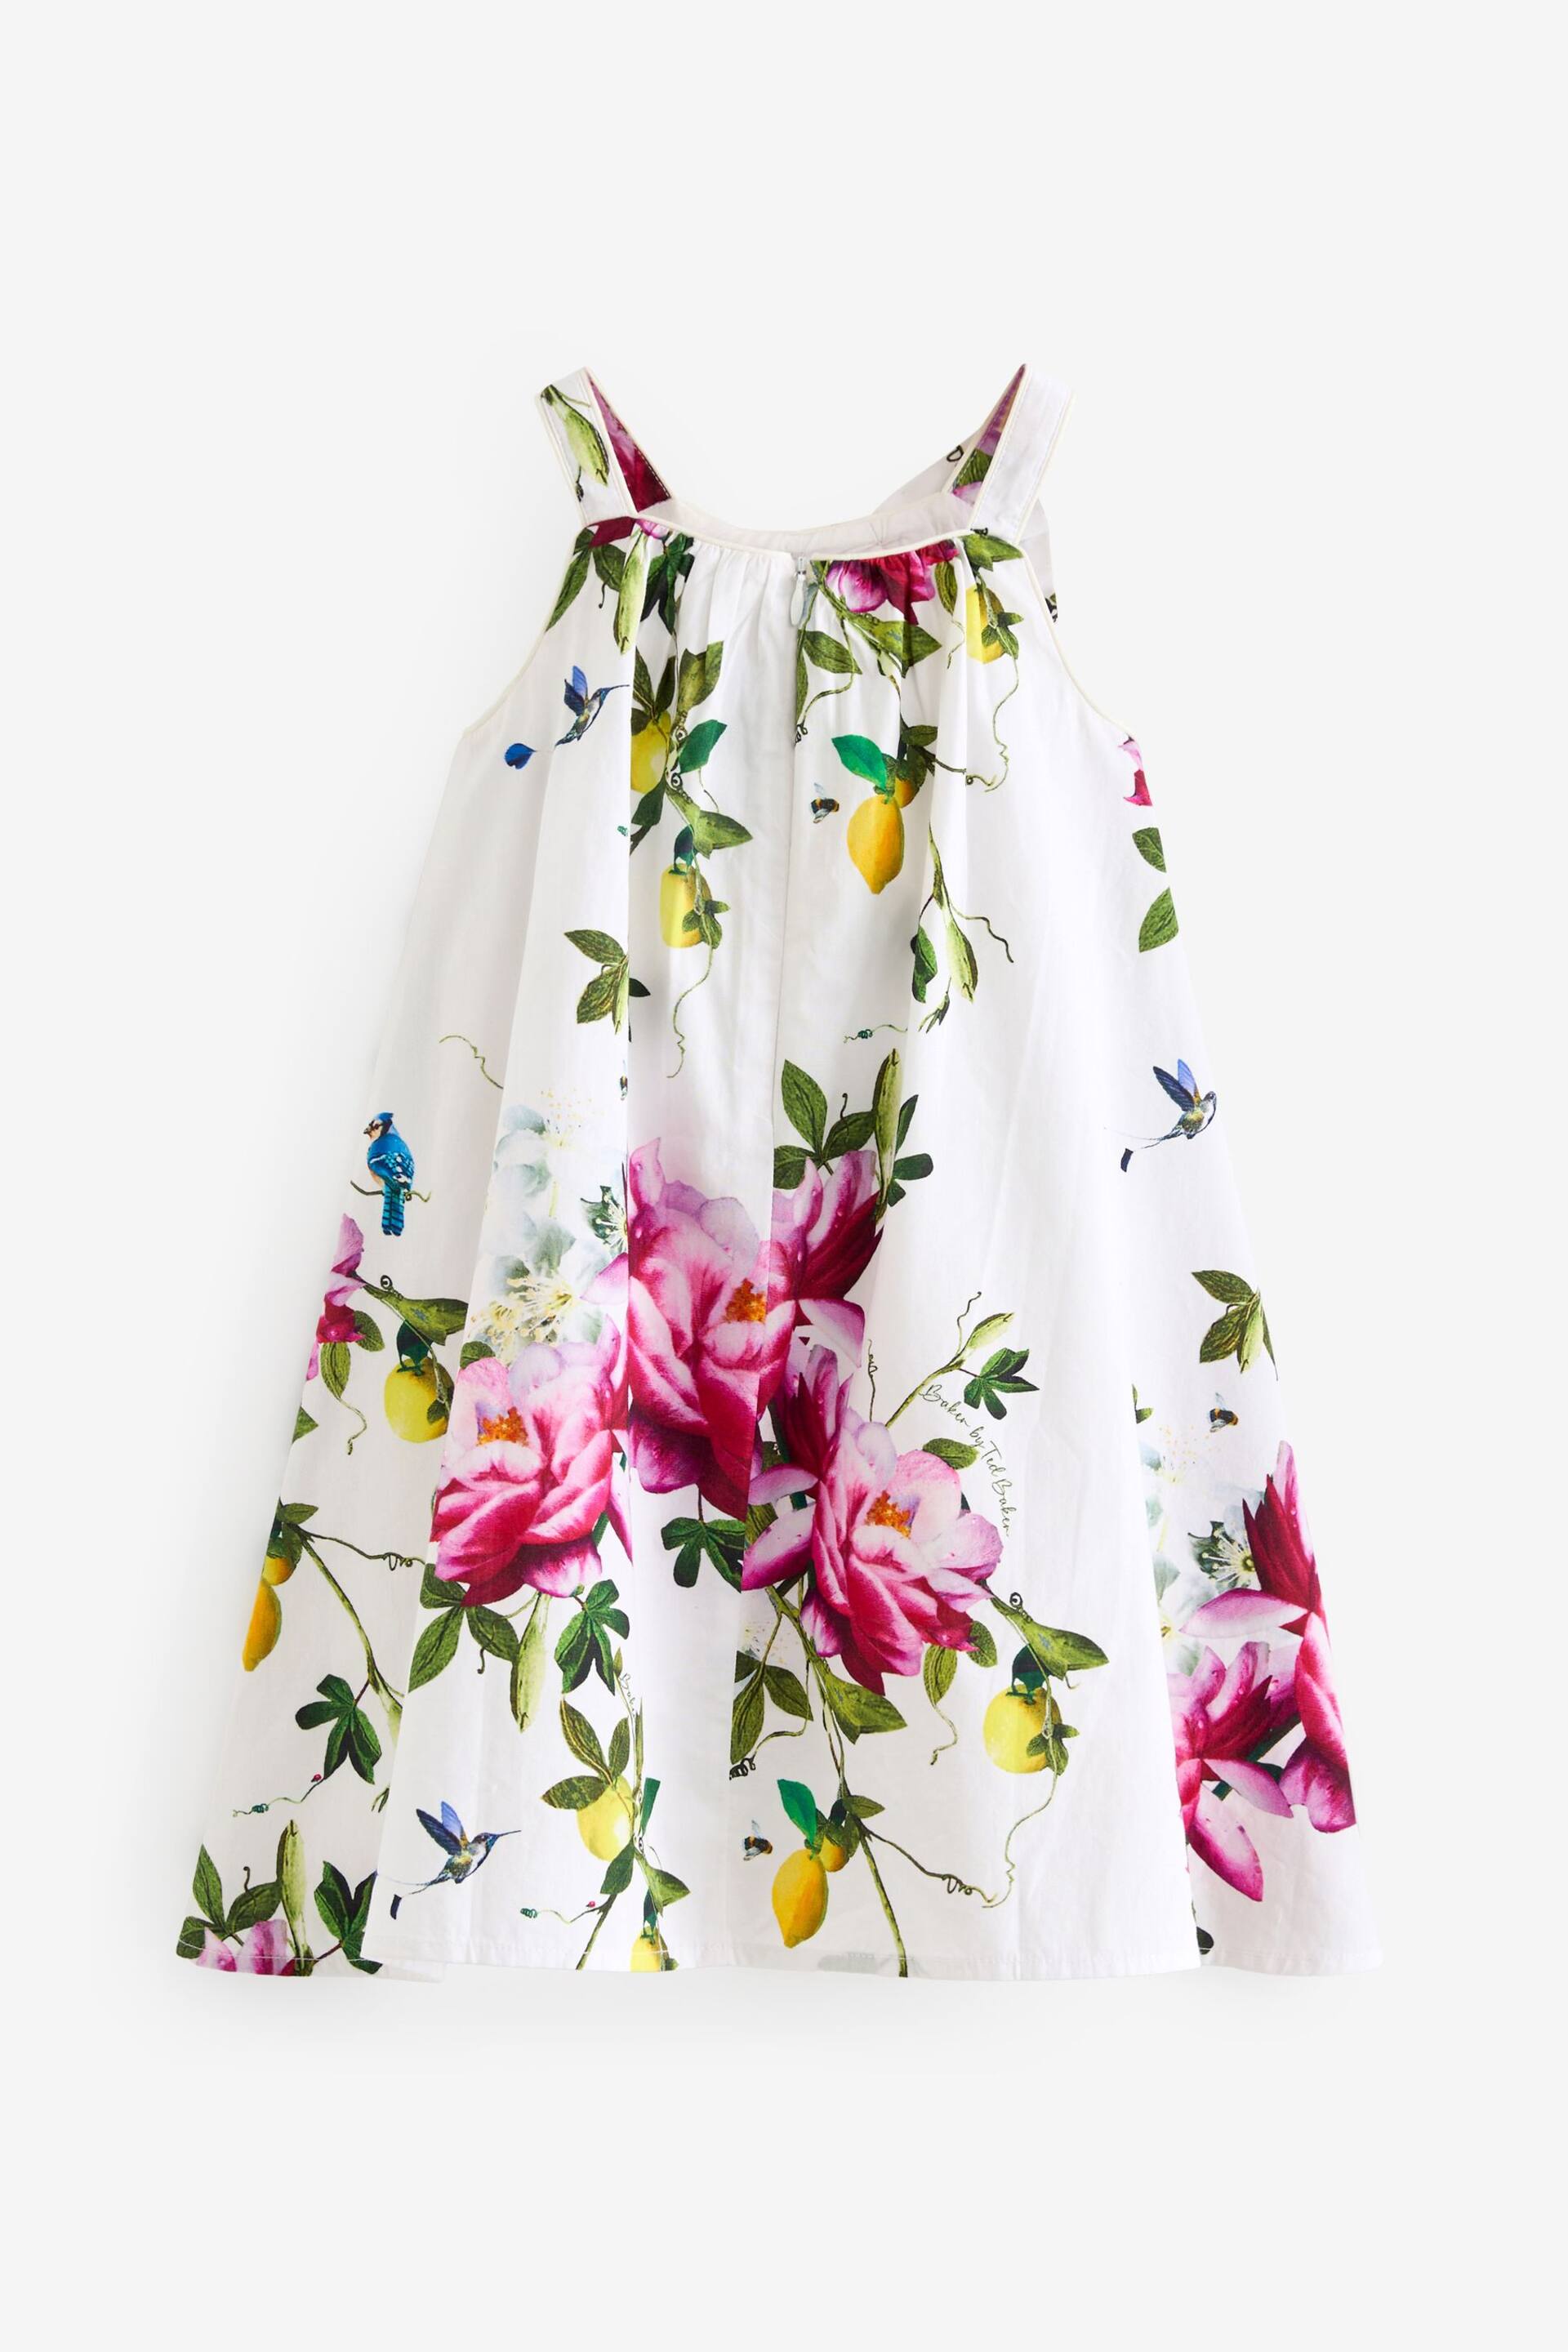 Baker by Ted Baker Floral Bow Woven White Dress - Image 7 of 11